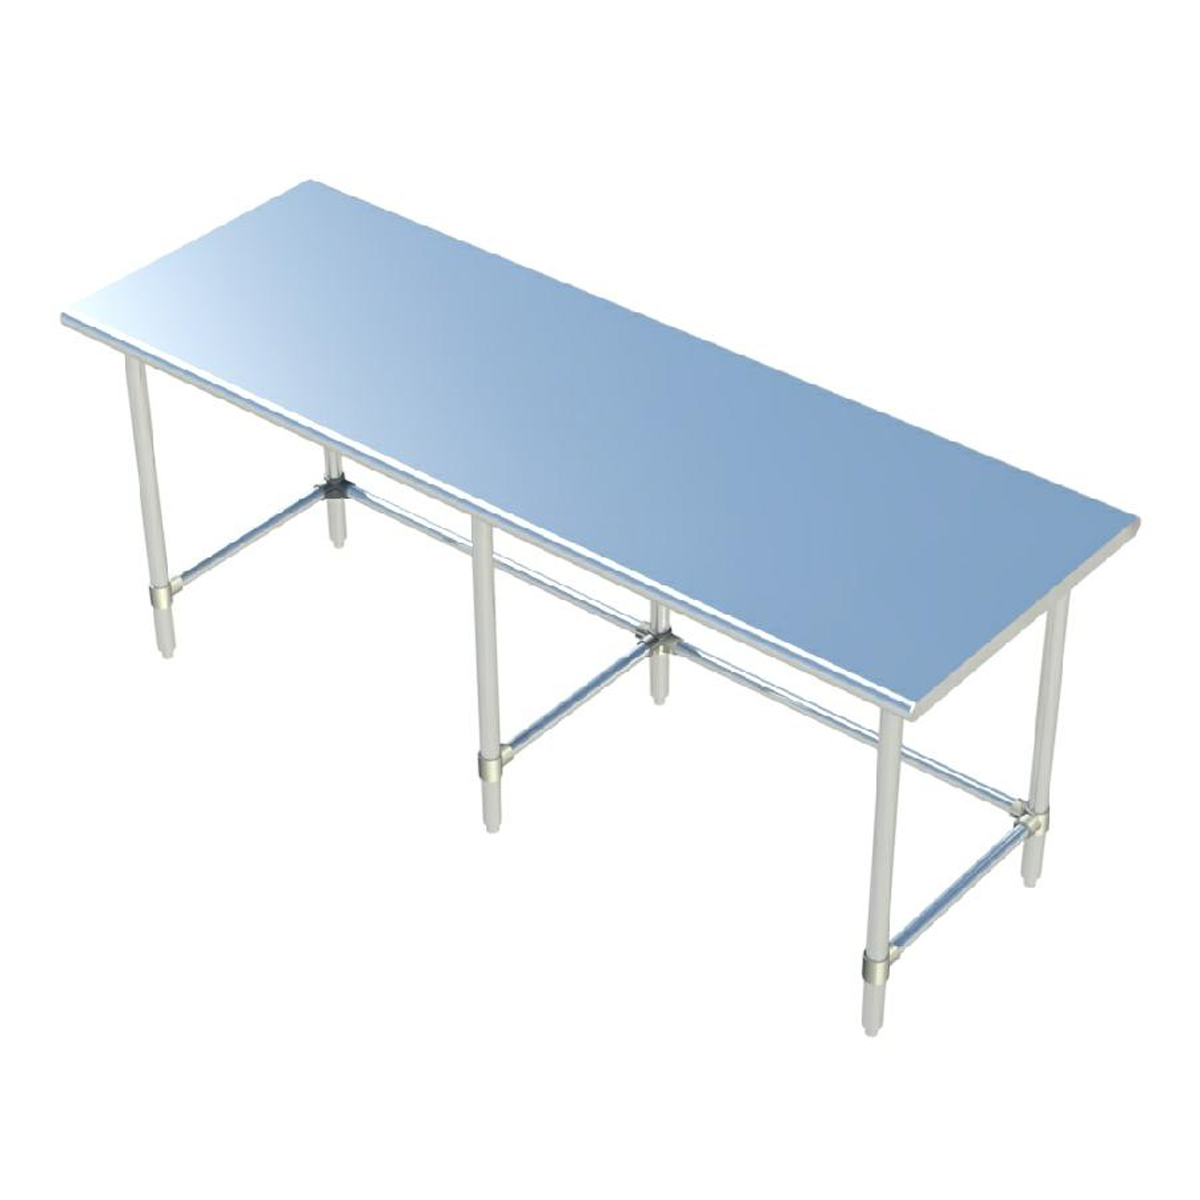 Sapphire SMTO-3684S Stainless Steel Top Work Table 84"W x 36"D